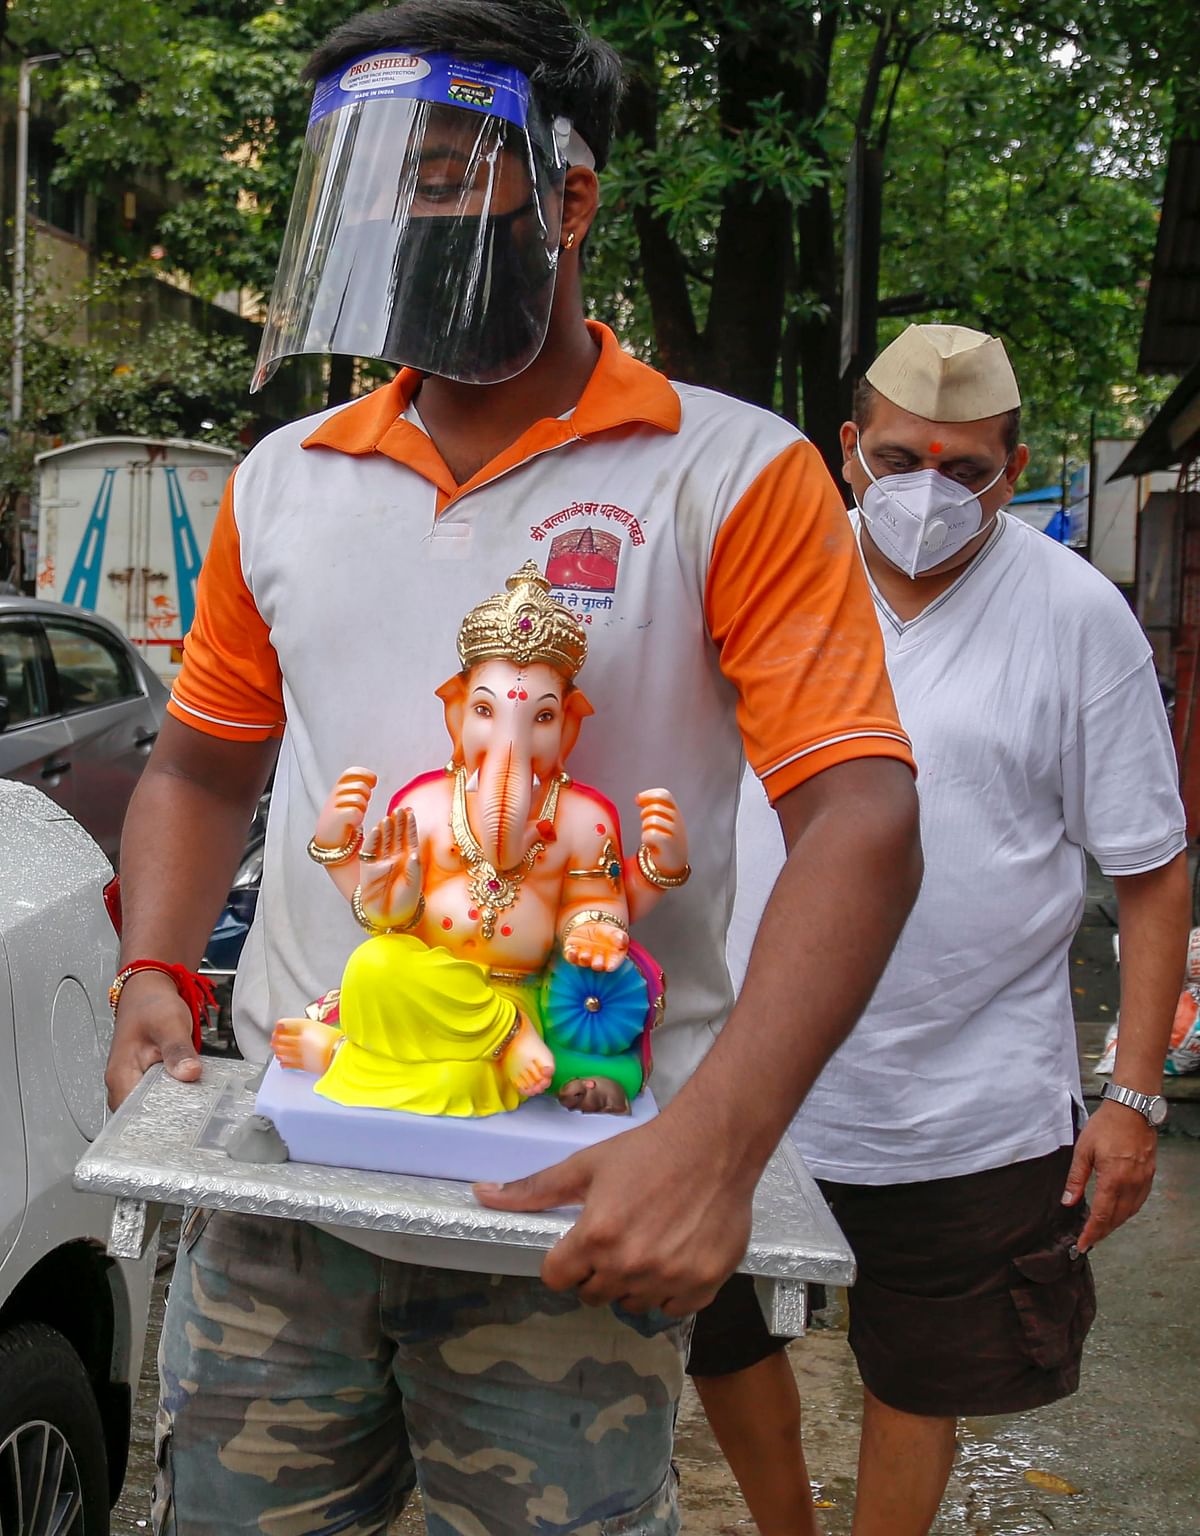 A devotee, wearing face shield amid COVID-19 pandemic, carries an idol of Lord Ganesha to install at his for Ganesh Utsav, in Thane. Credit: PTI